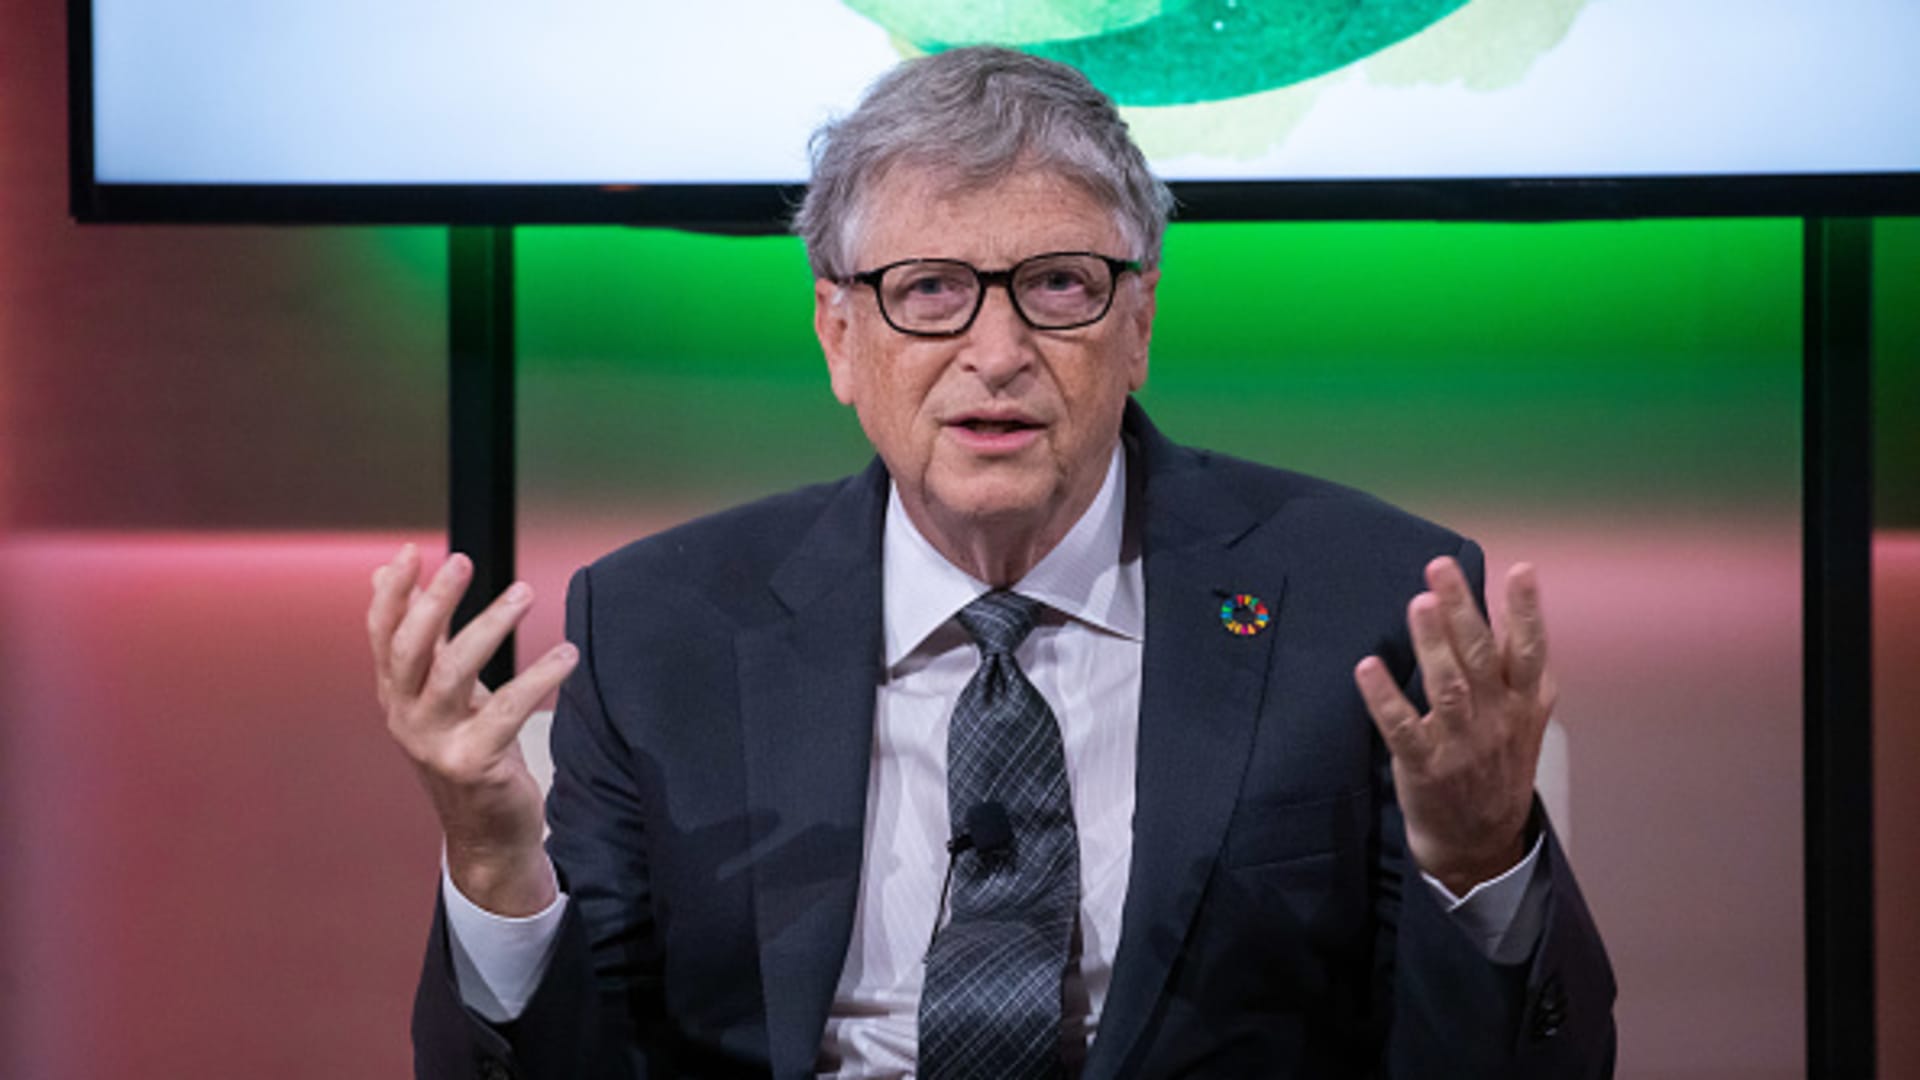 Bill Gates: You'll never solve climate change by asking people to consume less